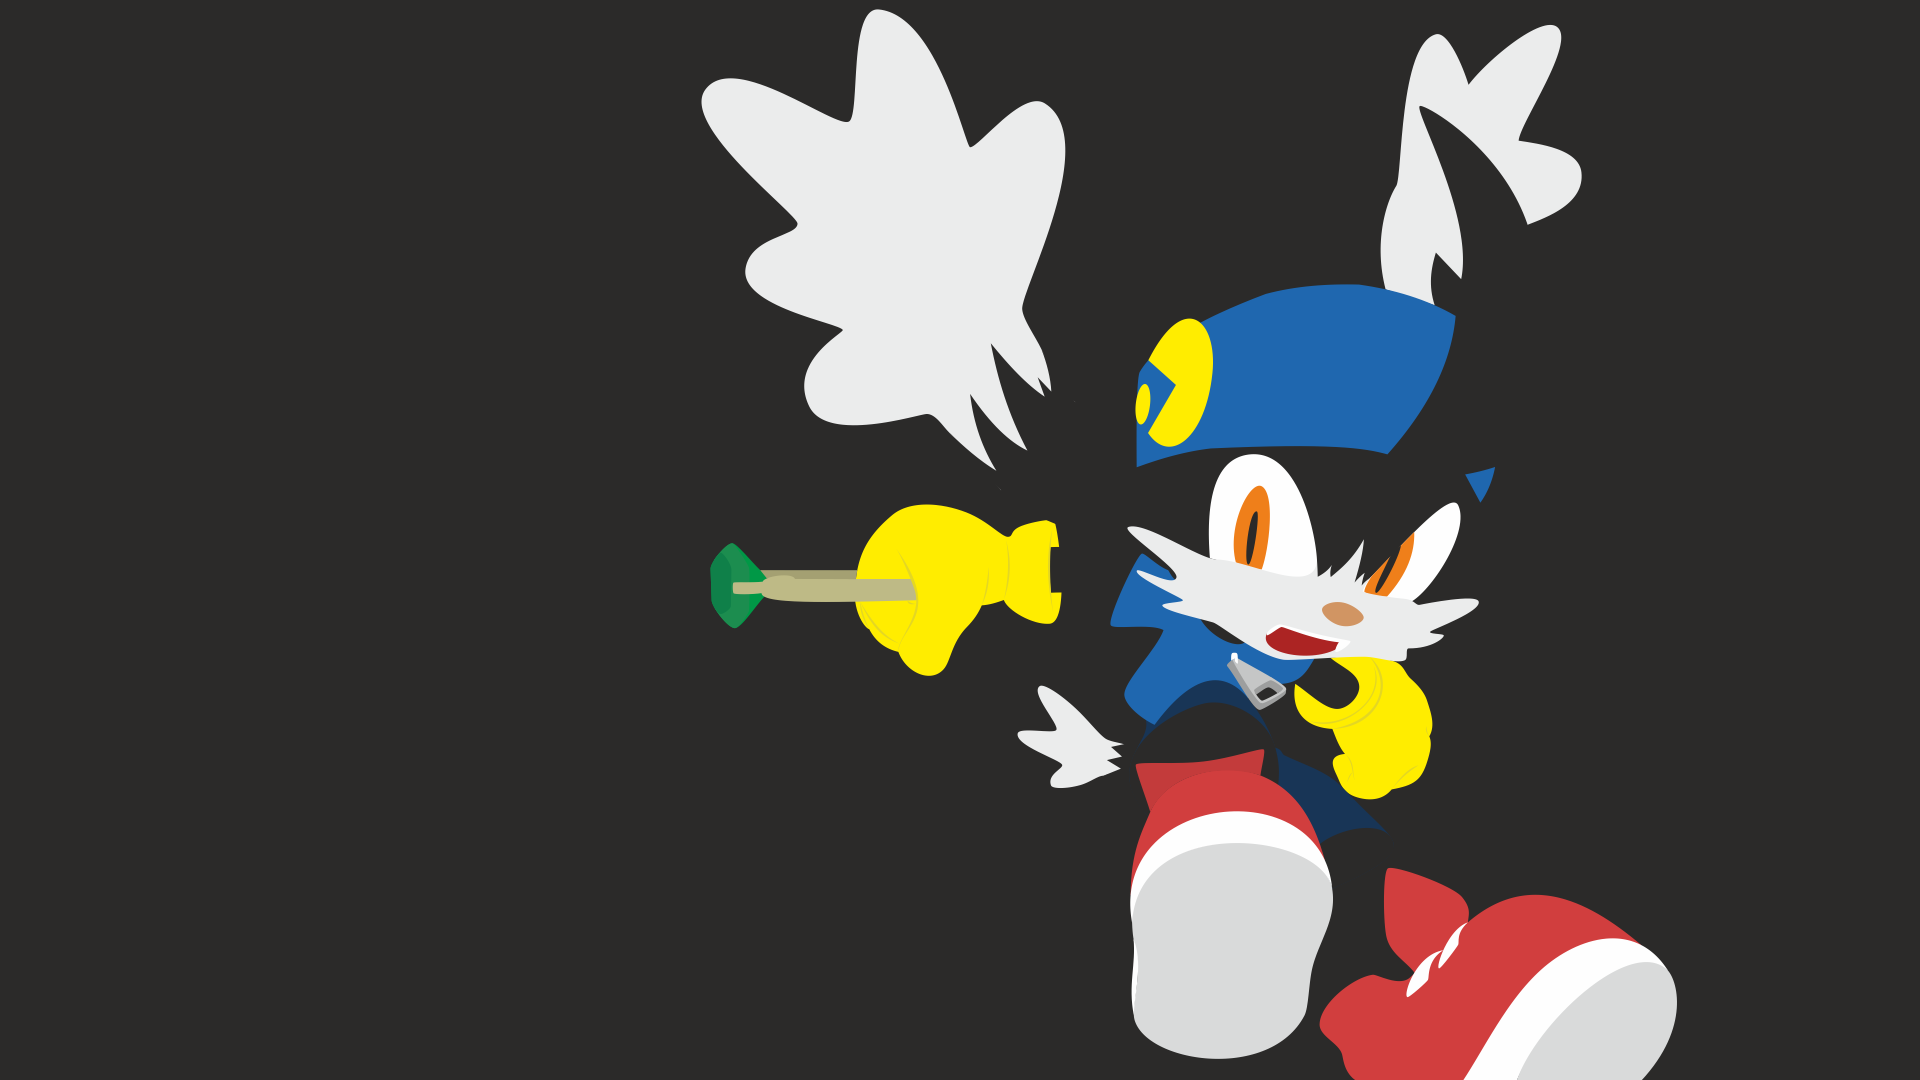 Klonoa Wallpaper. Klonoa Wii Wallpaper, Klonoa Wallpaper and